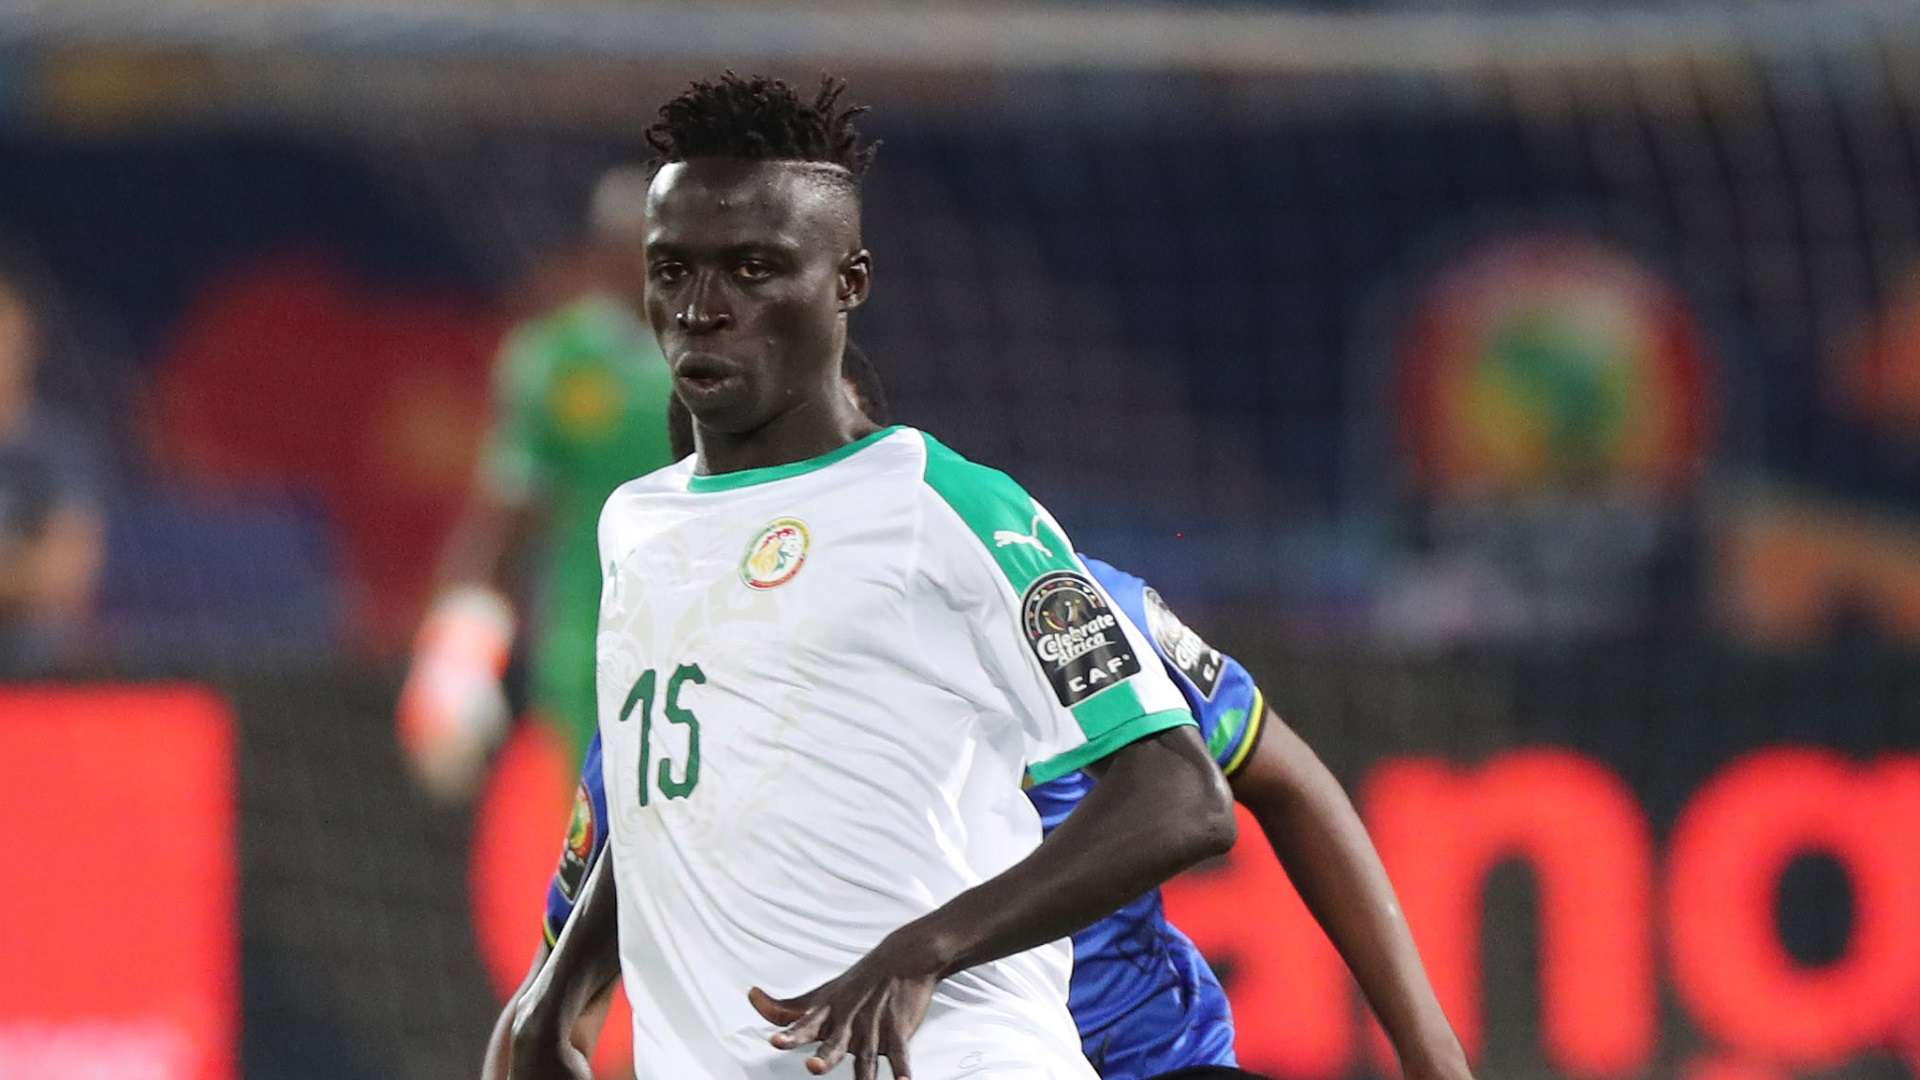 Krepin Diatta of Senegal during the 2019 Africa Cup of Nations